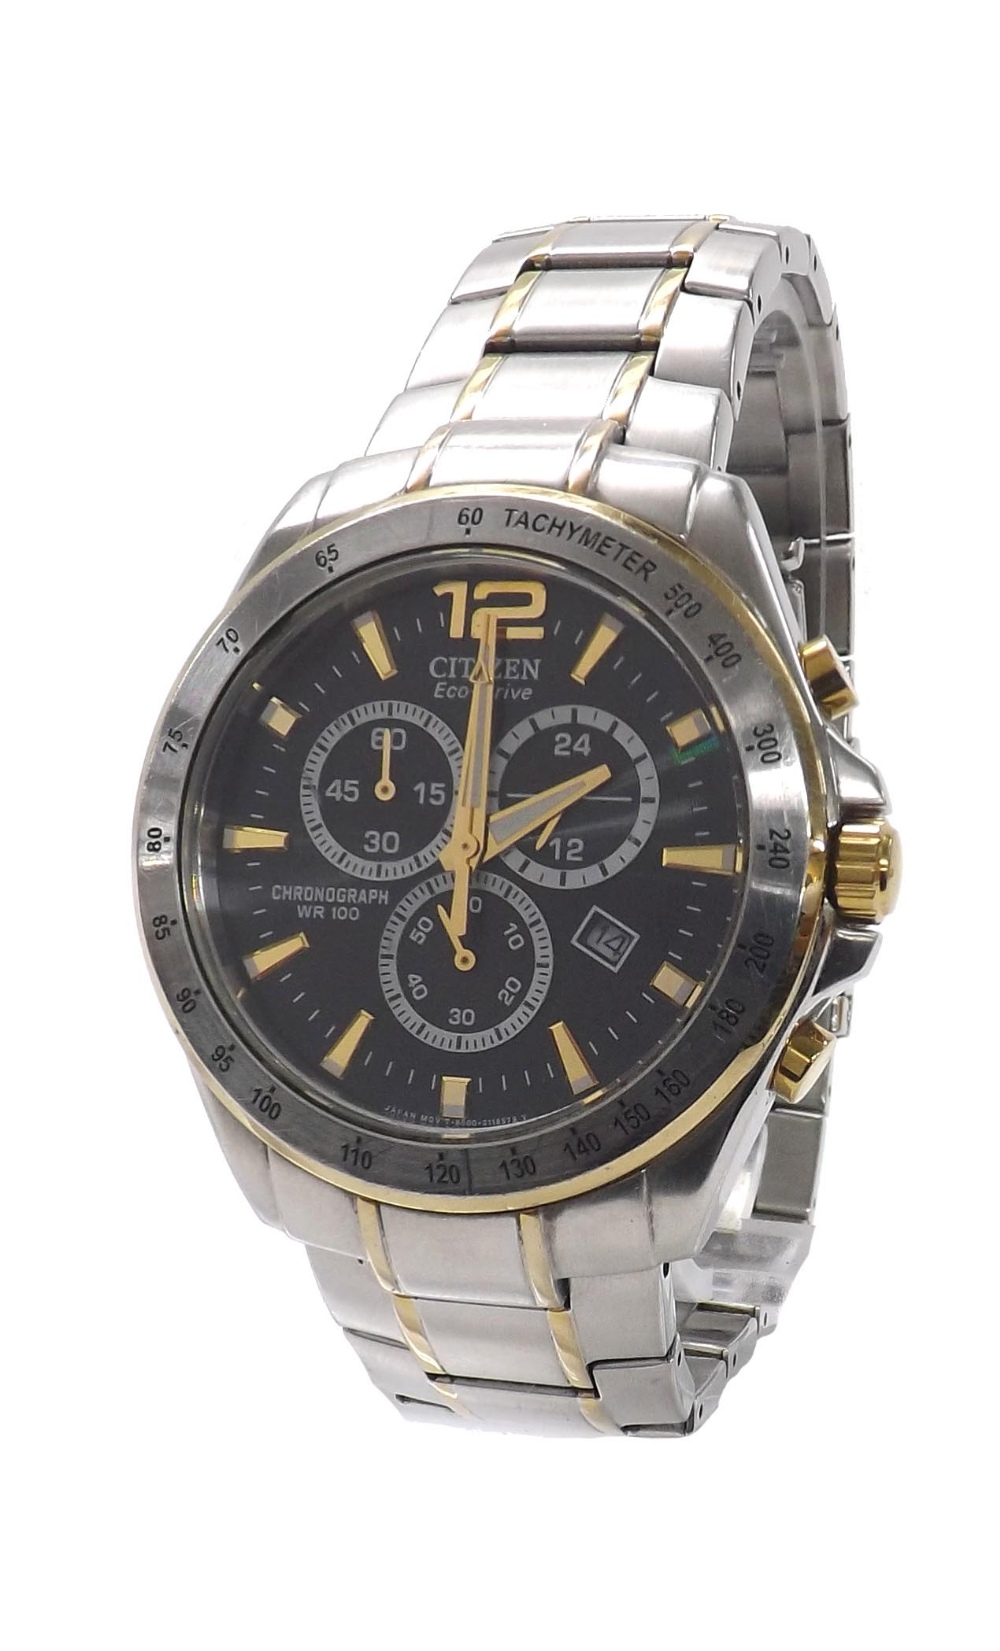 Citizen Eco-Drive chronograph WR100 stainless steel and gold plated  gentleman's bracelet watch, 4